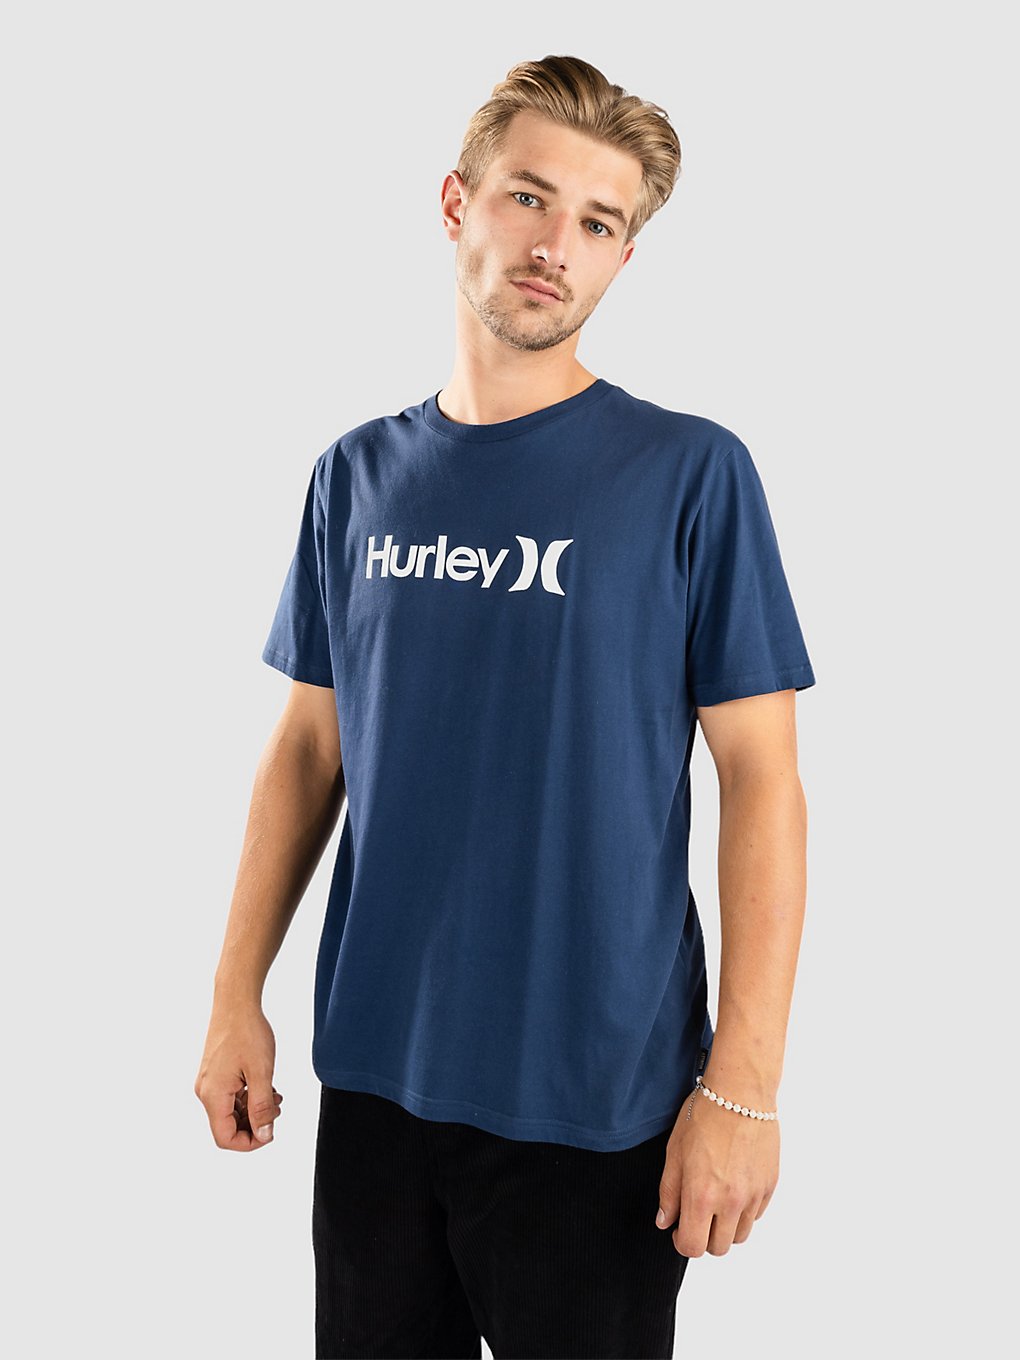 Hurley One & Only T-Shirt insignia blue kaufen